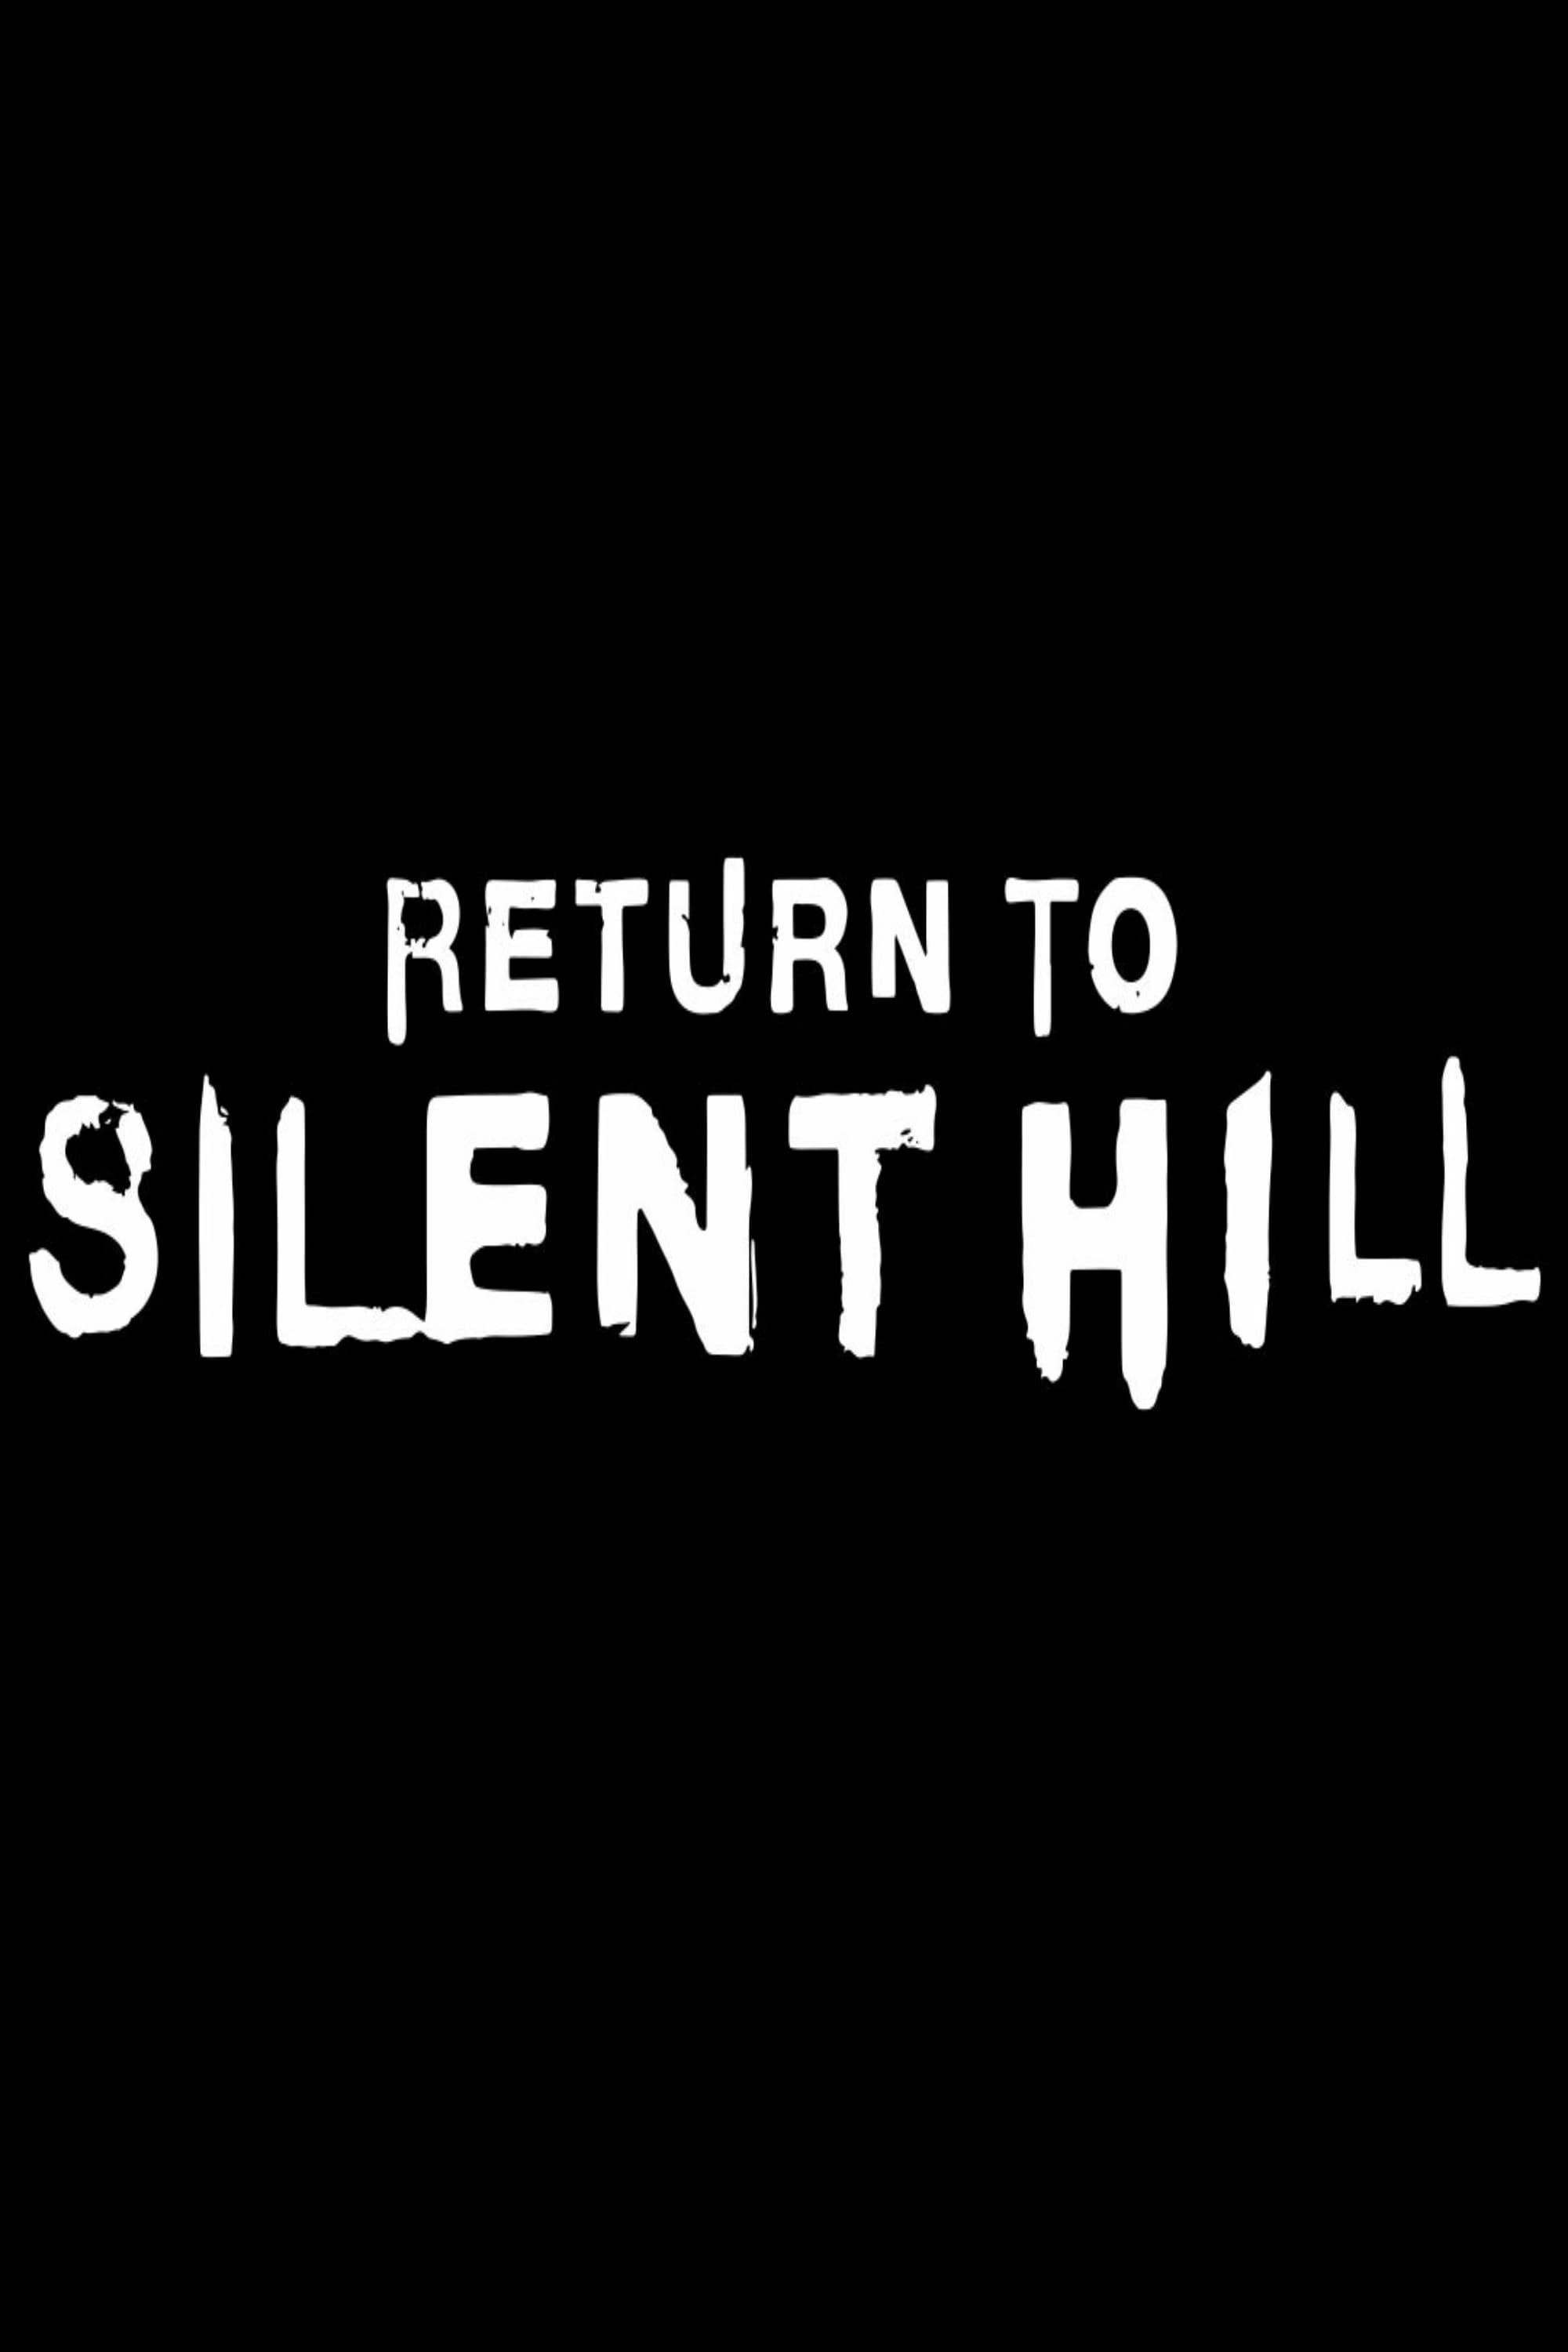 Return to Silent Hill poster